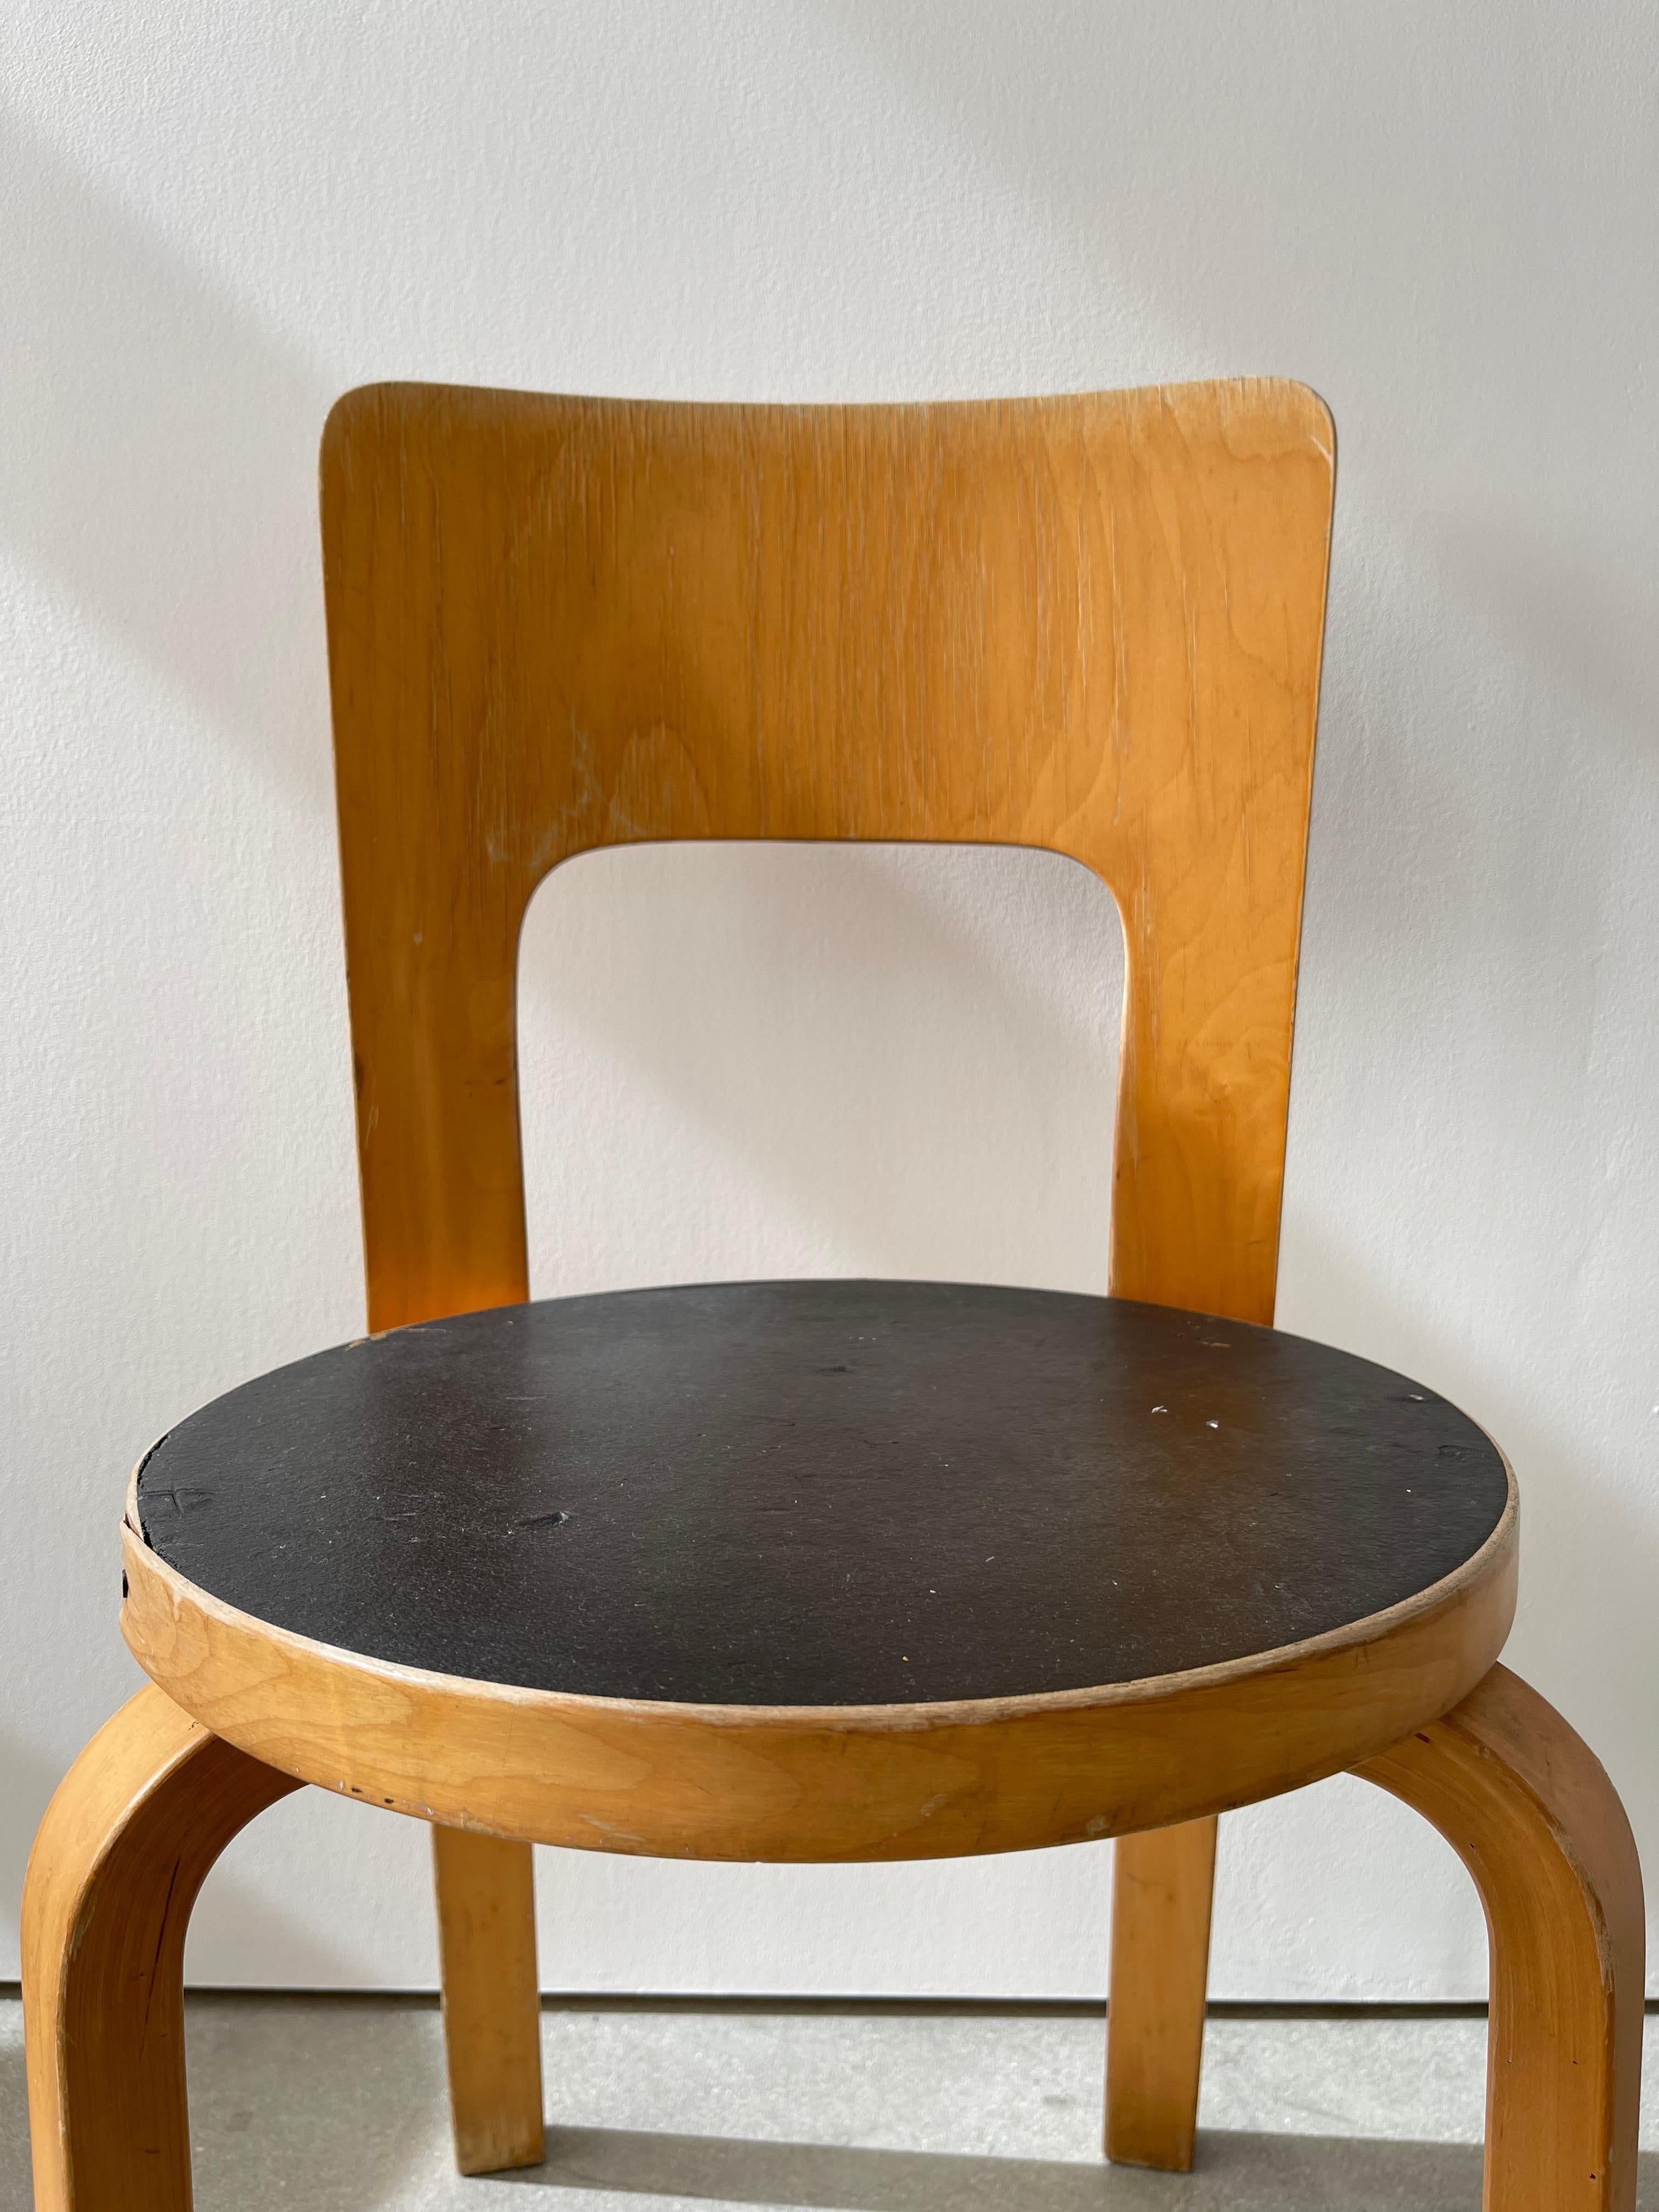 20th century Alvar Aalto Model 66 chair with the high-back dining chair has a solid birch core with birch laminate and face material. Solid birch legs and a high seat back made from molded birch plywood give the chair a formal presence. The 66 chair